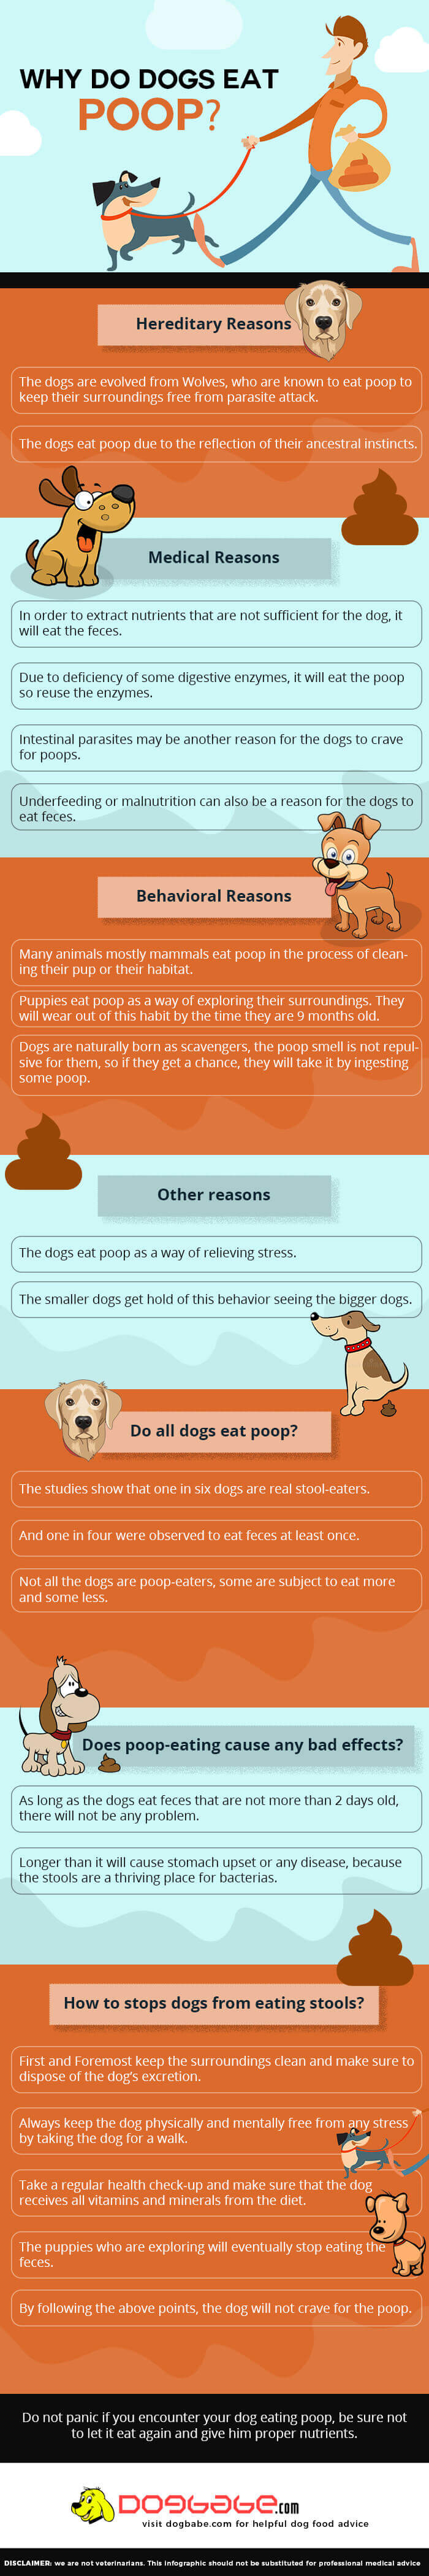 Why do dogs eat their poop infographic